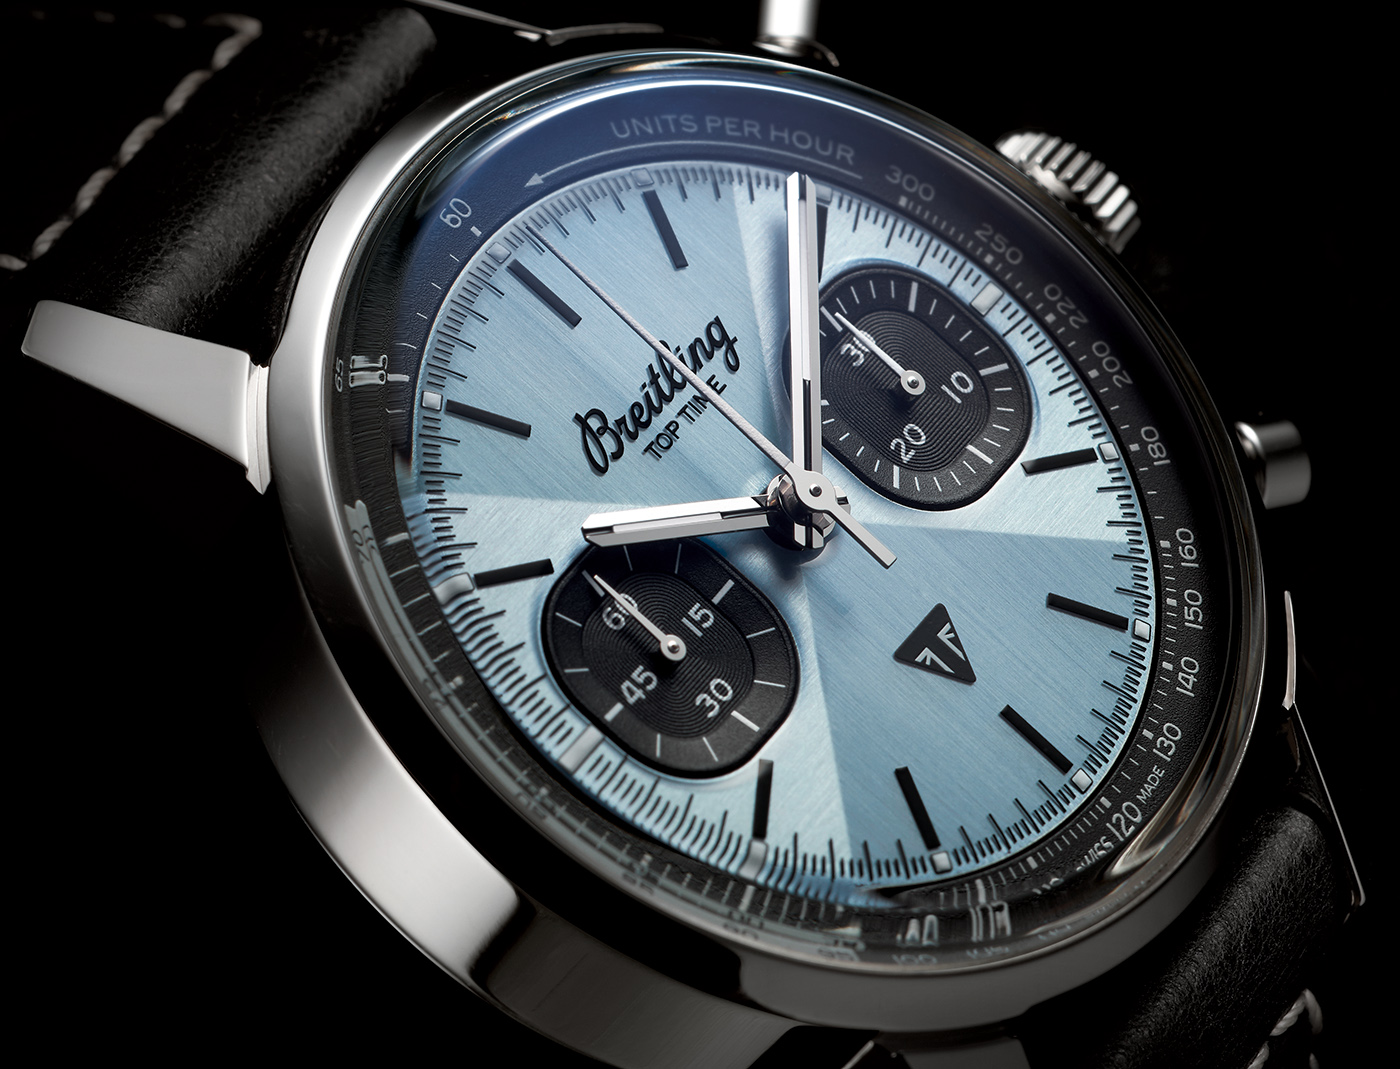 BREITLING TOP TIME TRIUMPH REVIEW 